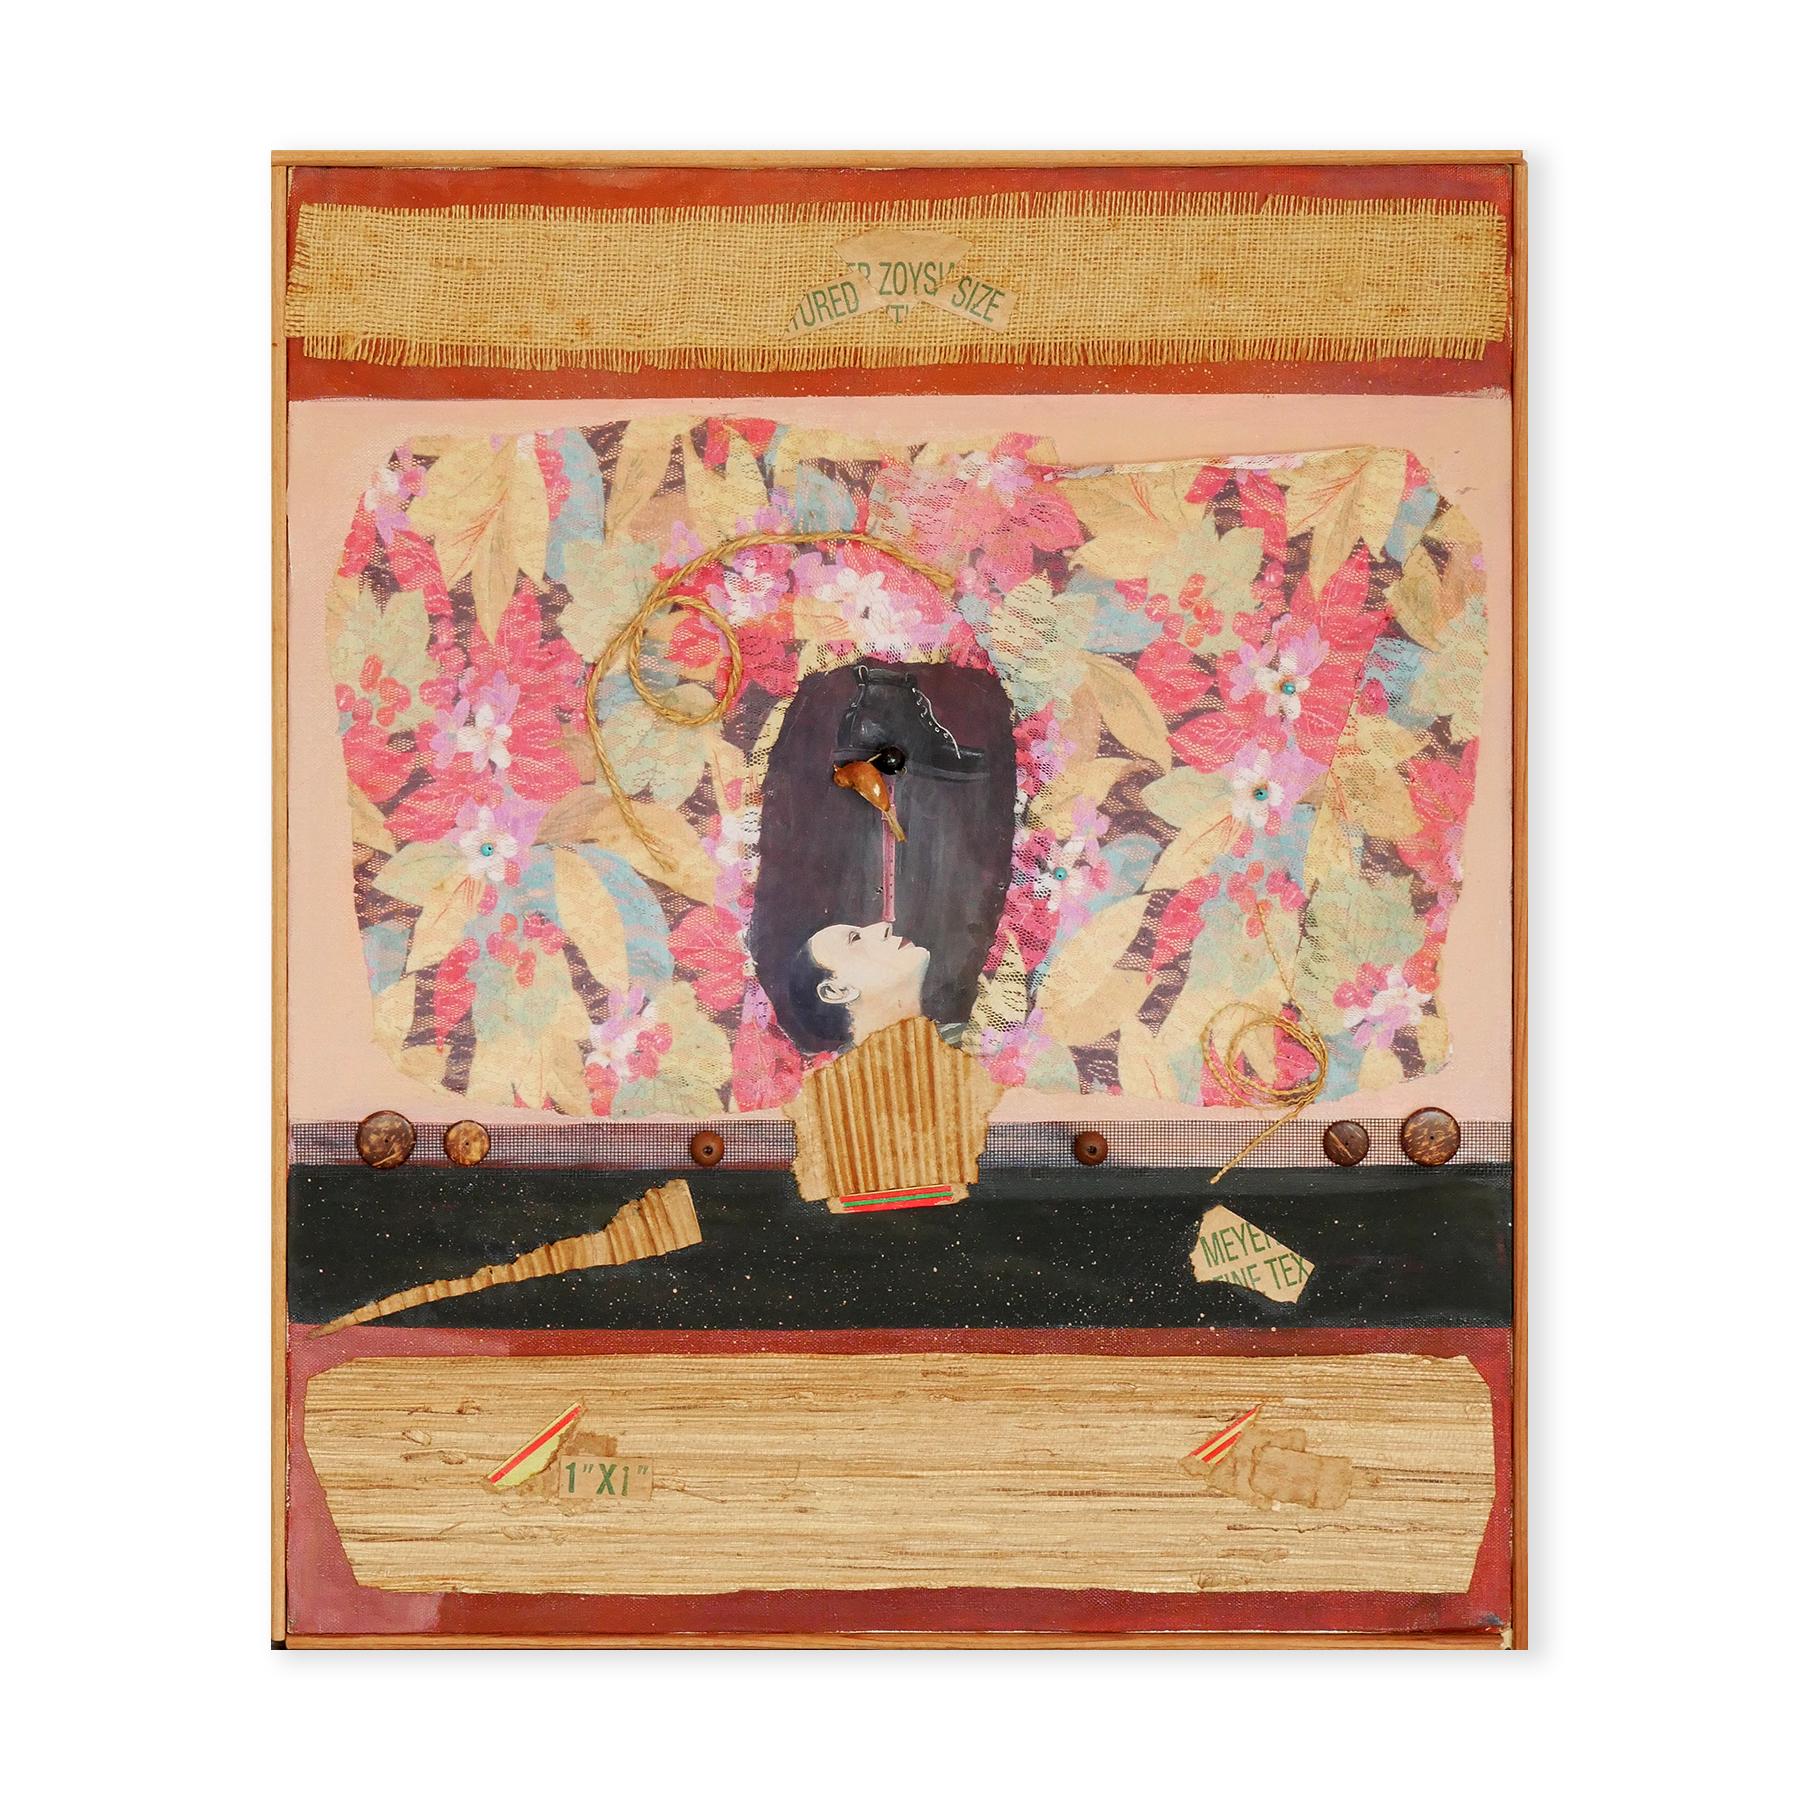 Pink and orange abstract figurative mixed media painting by Houston, TX artist Margaret Nobler. The painting features a figure of a female against a pink-toned floral fabric. Strips of brown burlap cloth can also be seen at the top and bottom part